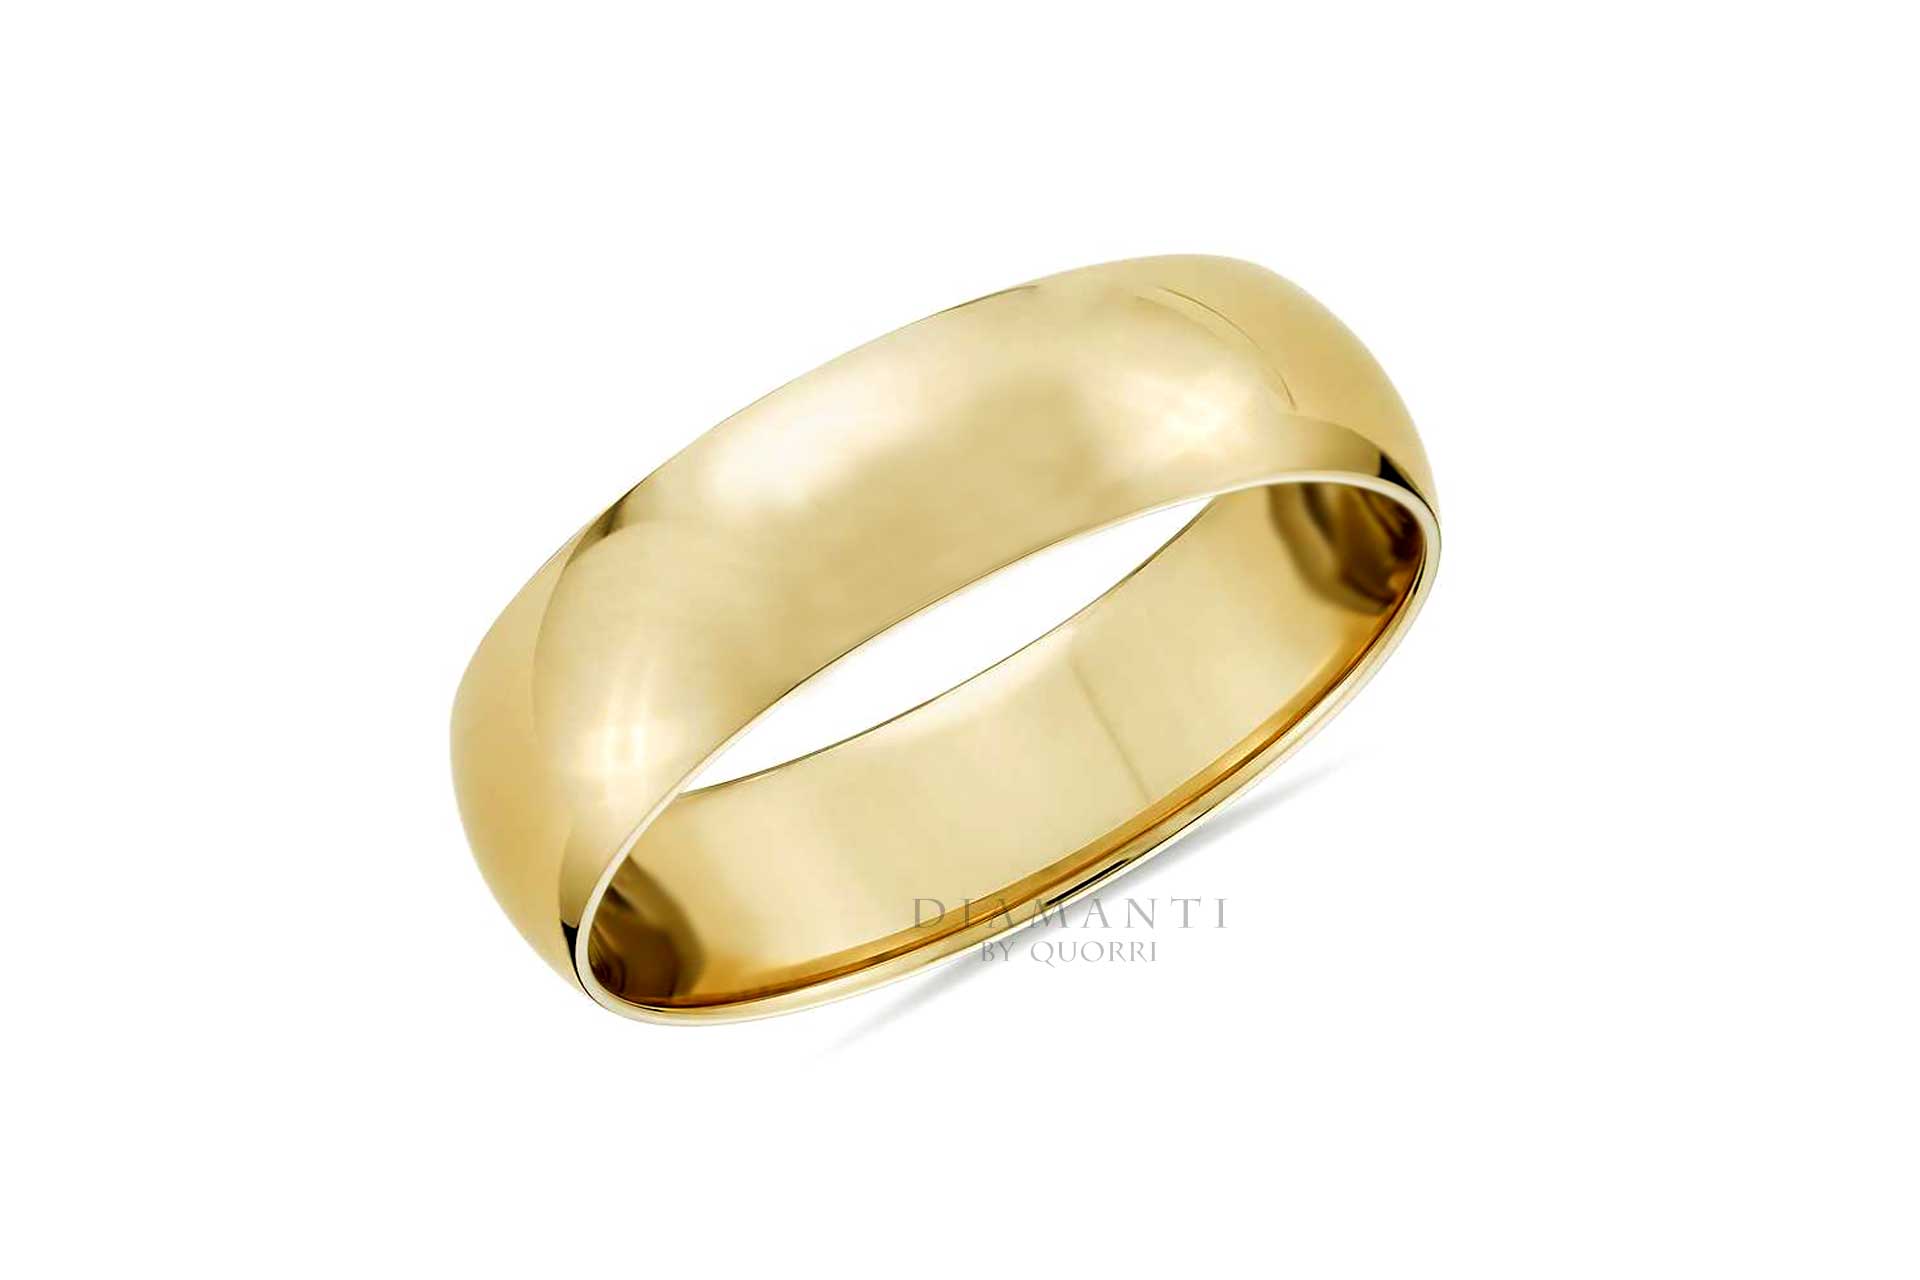 affordable gold and platinum mens wedding bands by quorri canada